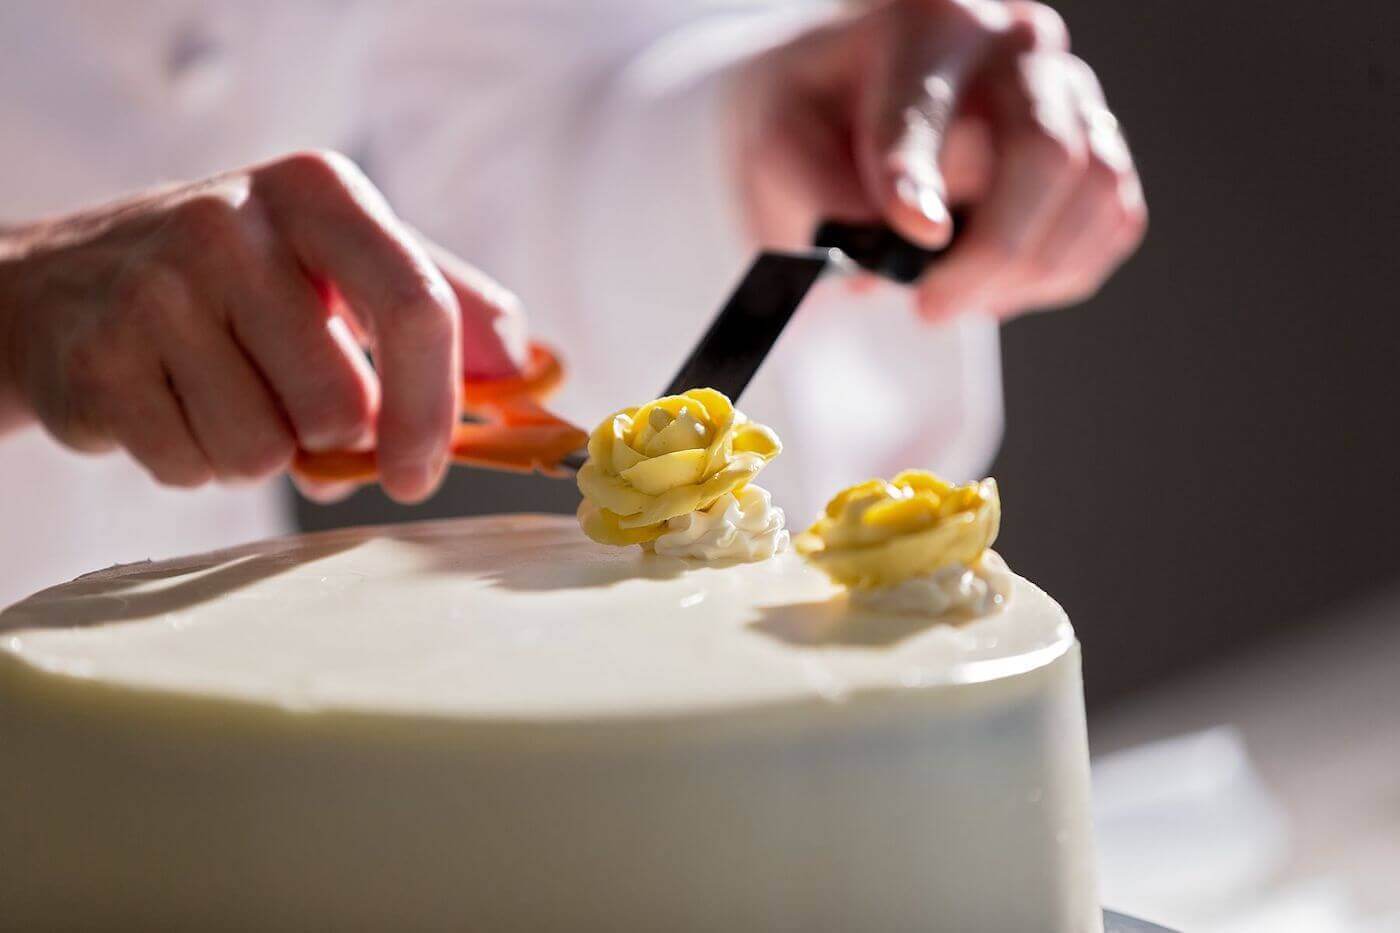 Tips from a cake decorator for perfect cake decorating